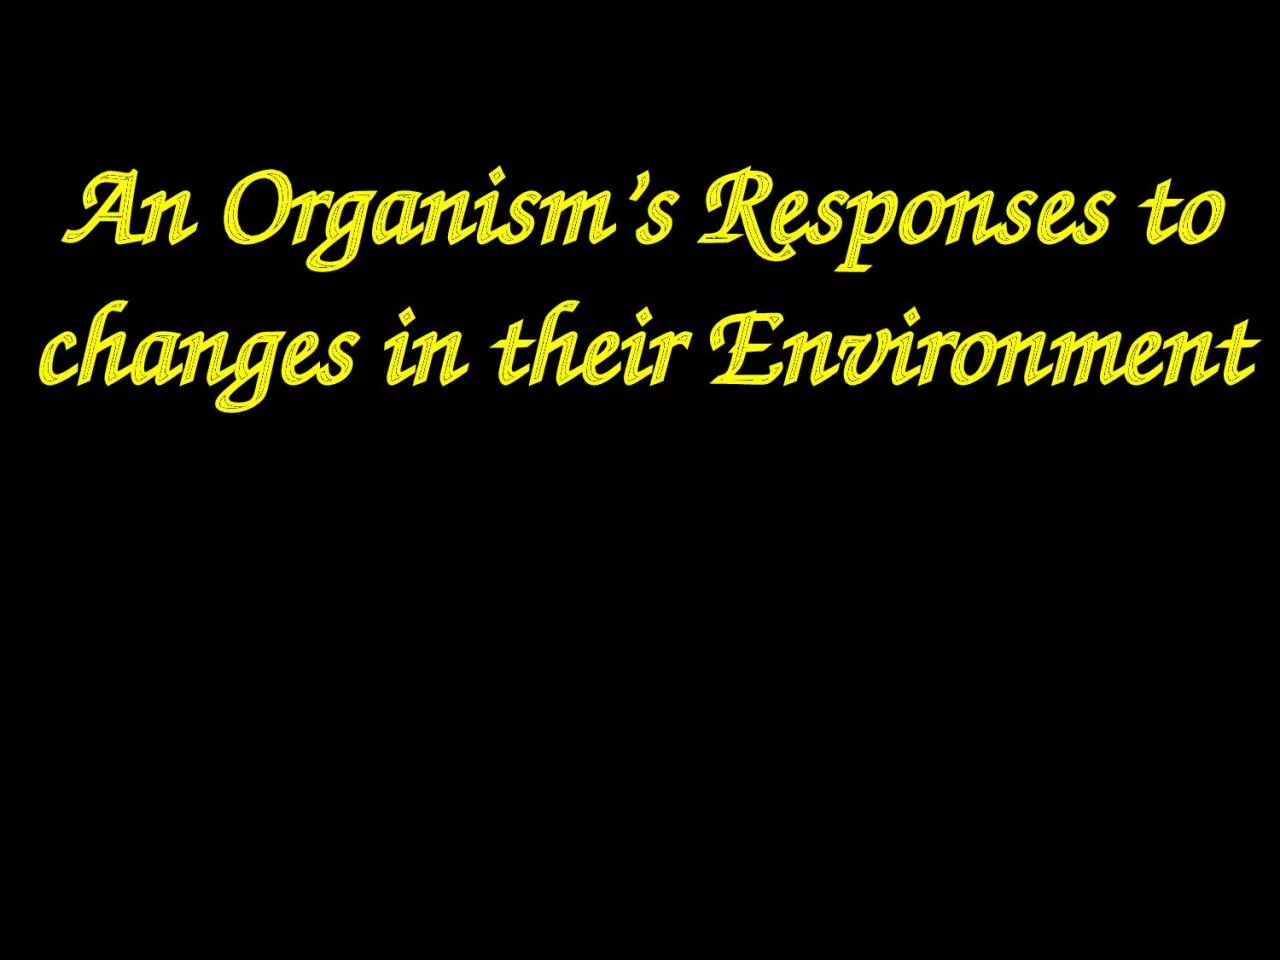 An Organism’s Responses to changes in their Environment